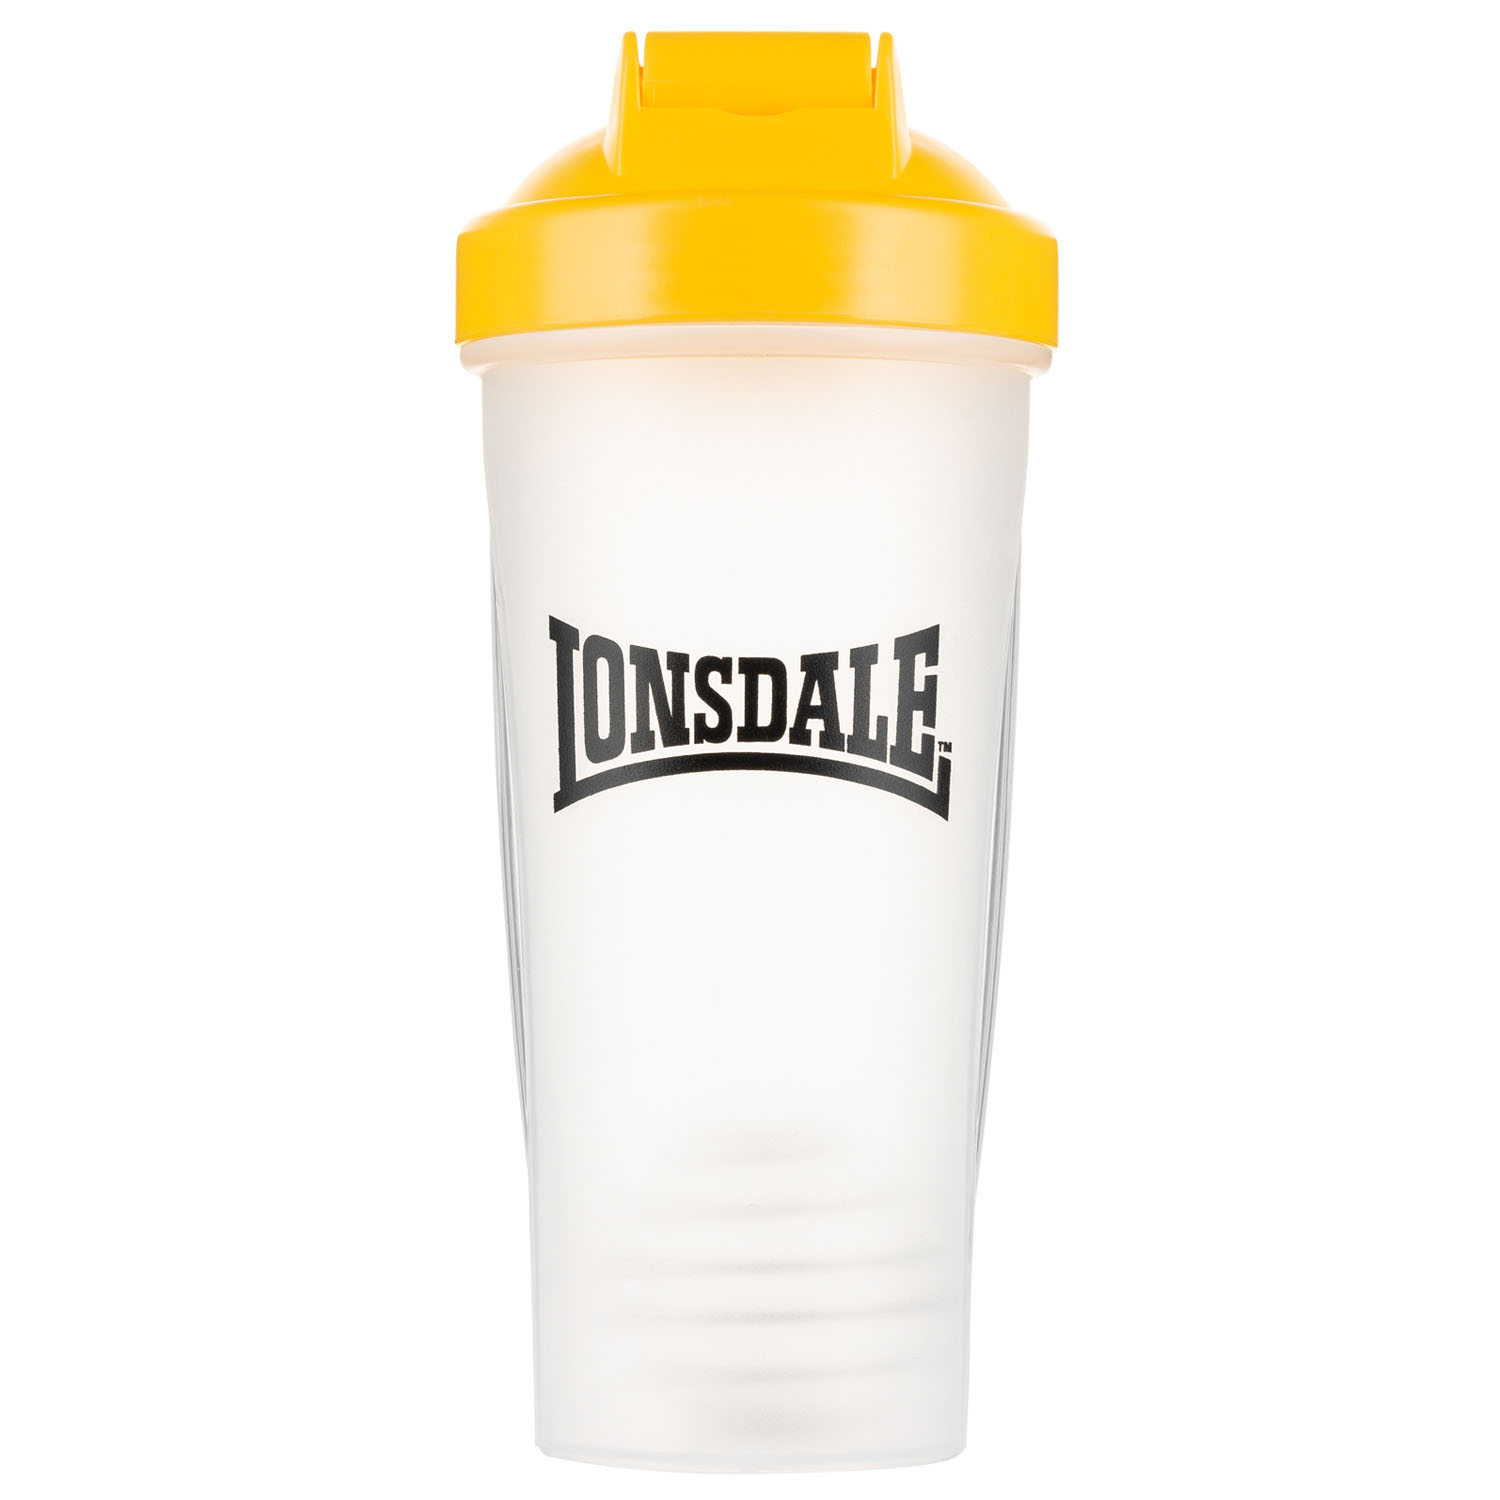 Lonsdale Shaker, Vintage, yellow